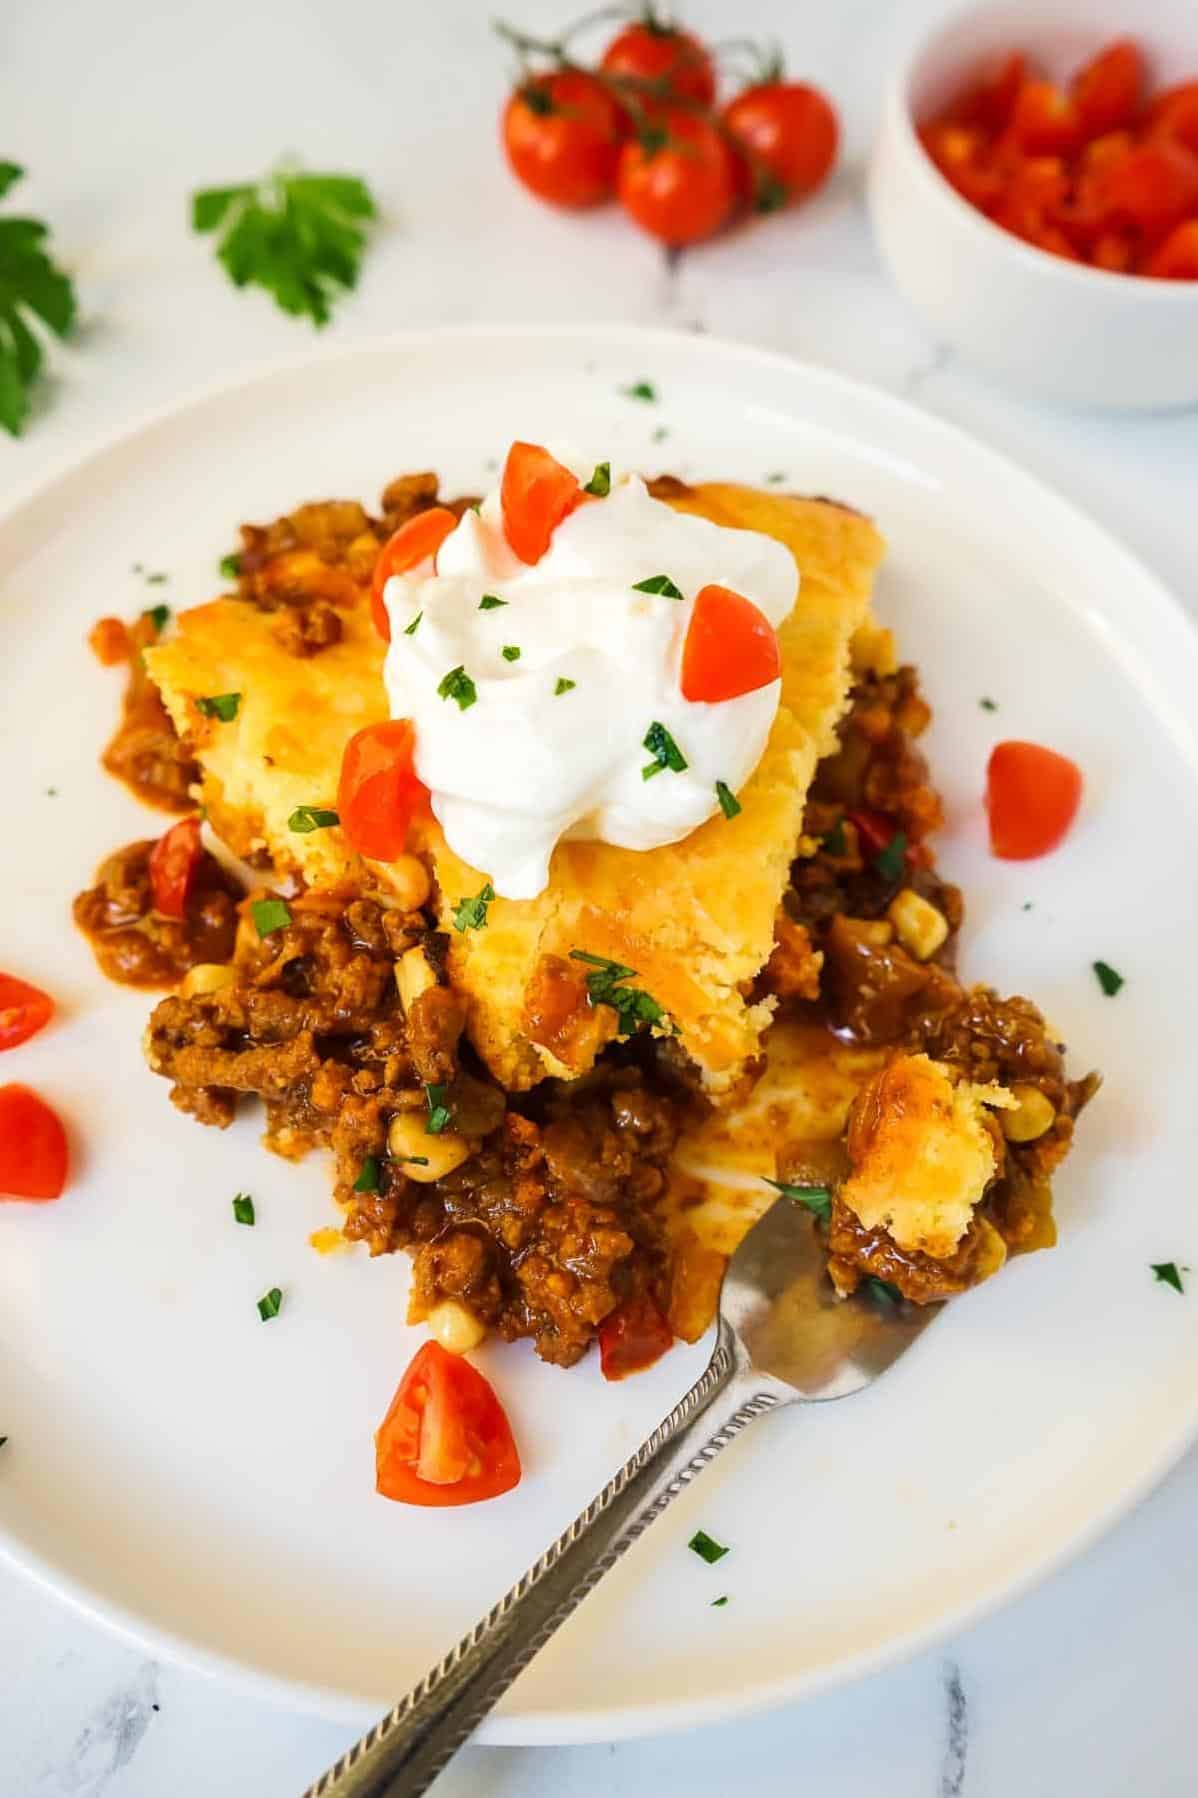  A medley of flavors and textures in this Corn Bread Tamale Pie.